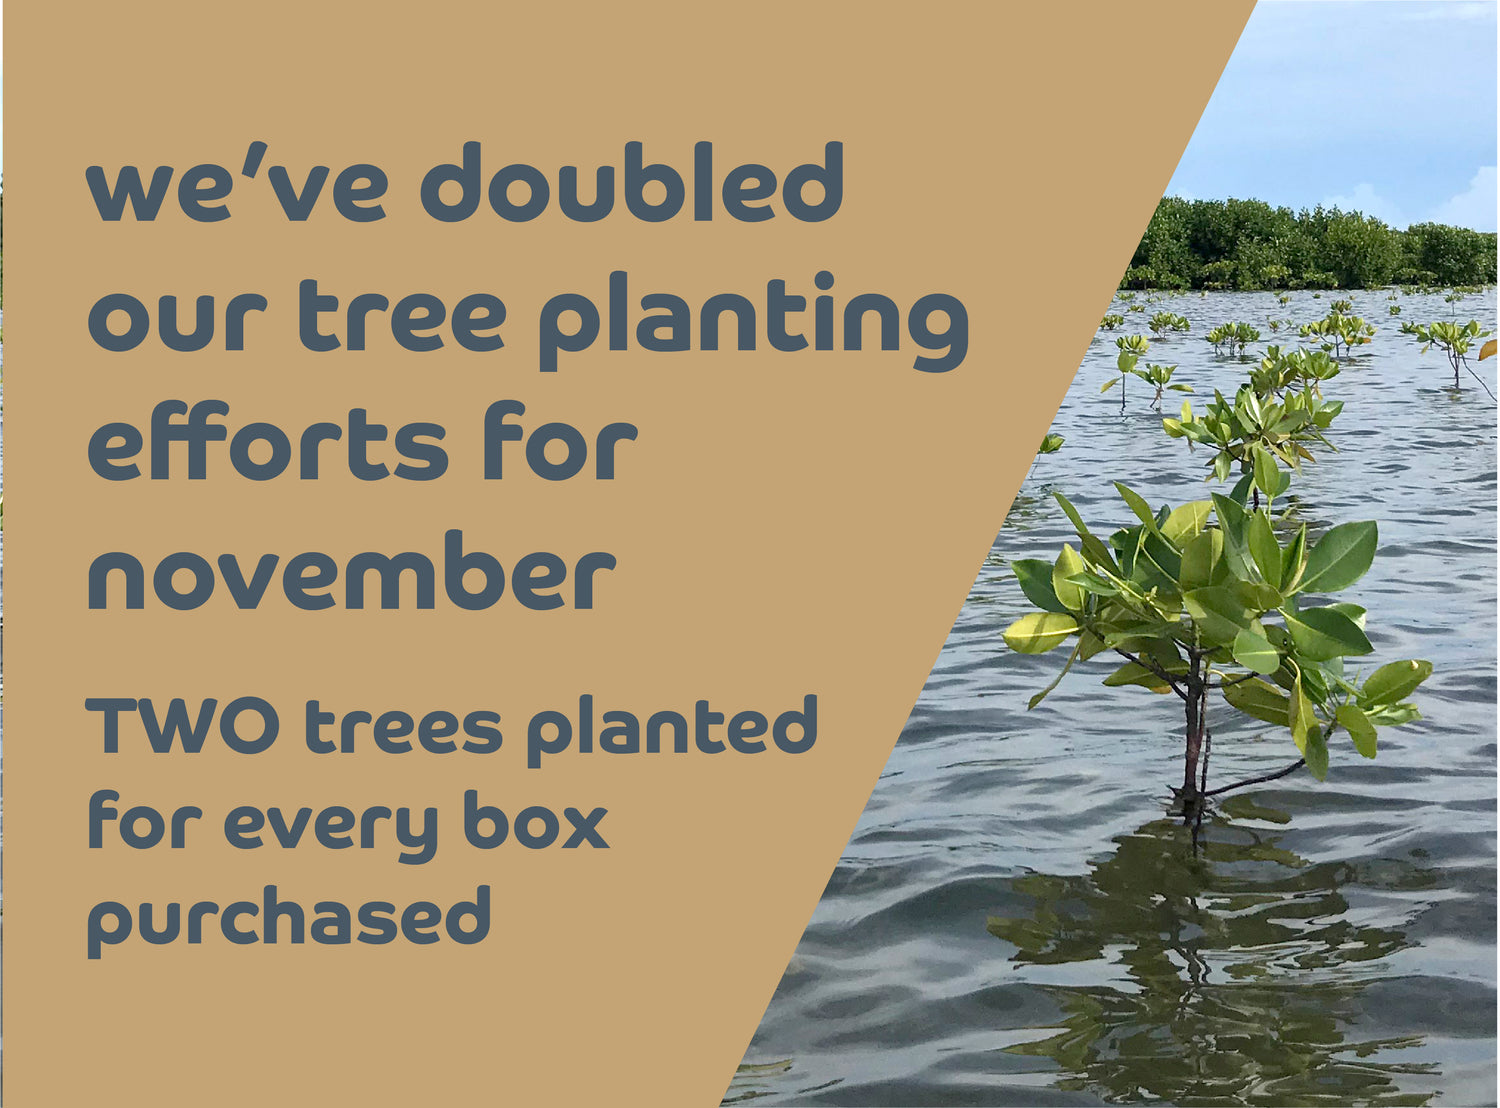 We're on a roll to plant 100,000 trees by the end of the year!